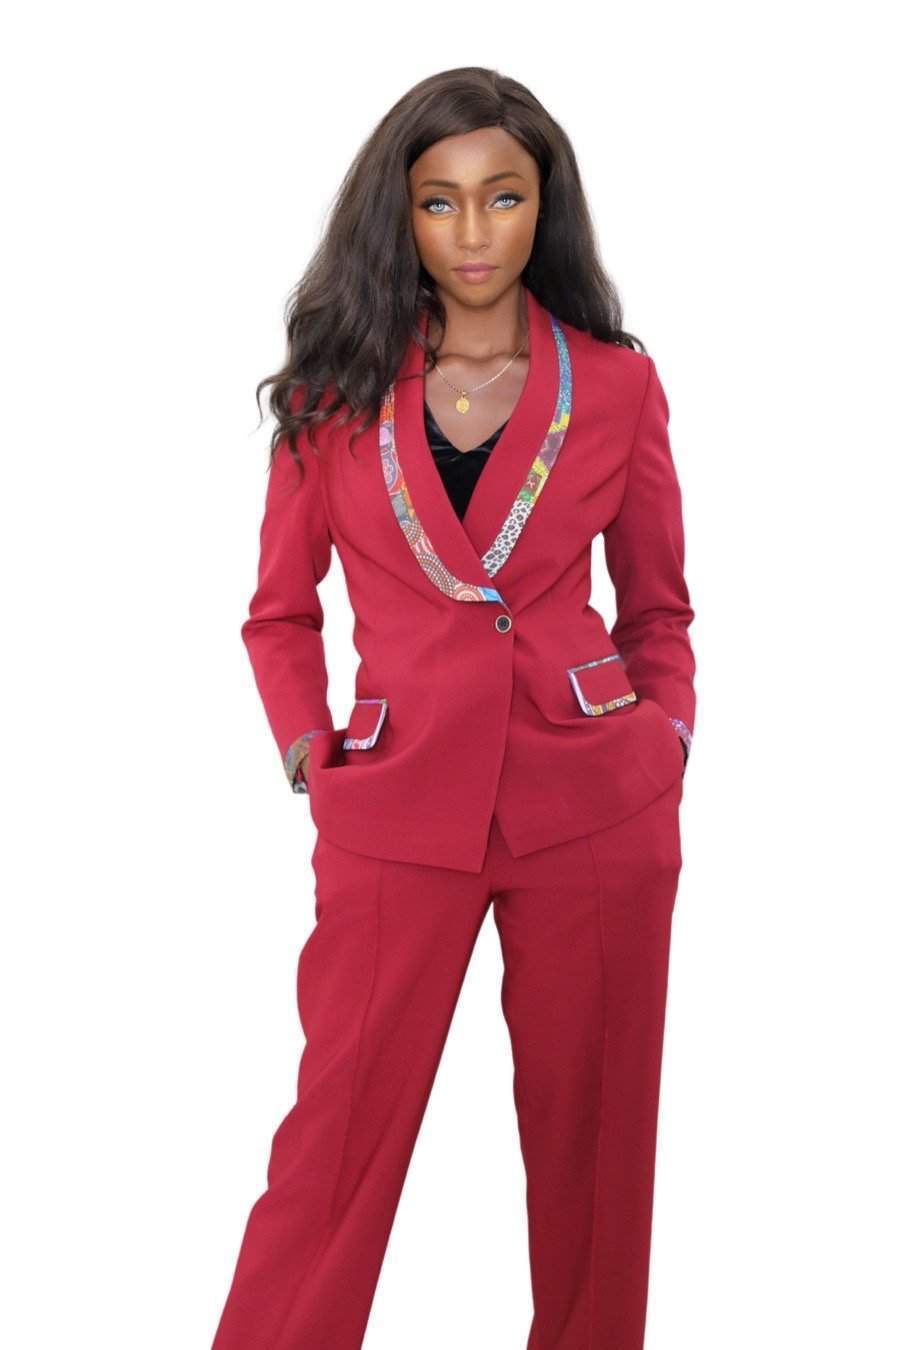 Red Business Suits Women, Red Business Suit Ladies